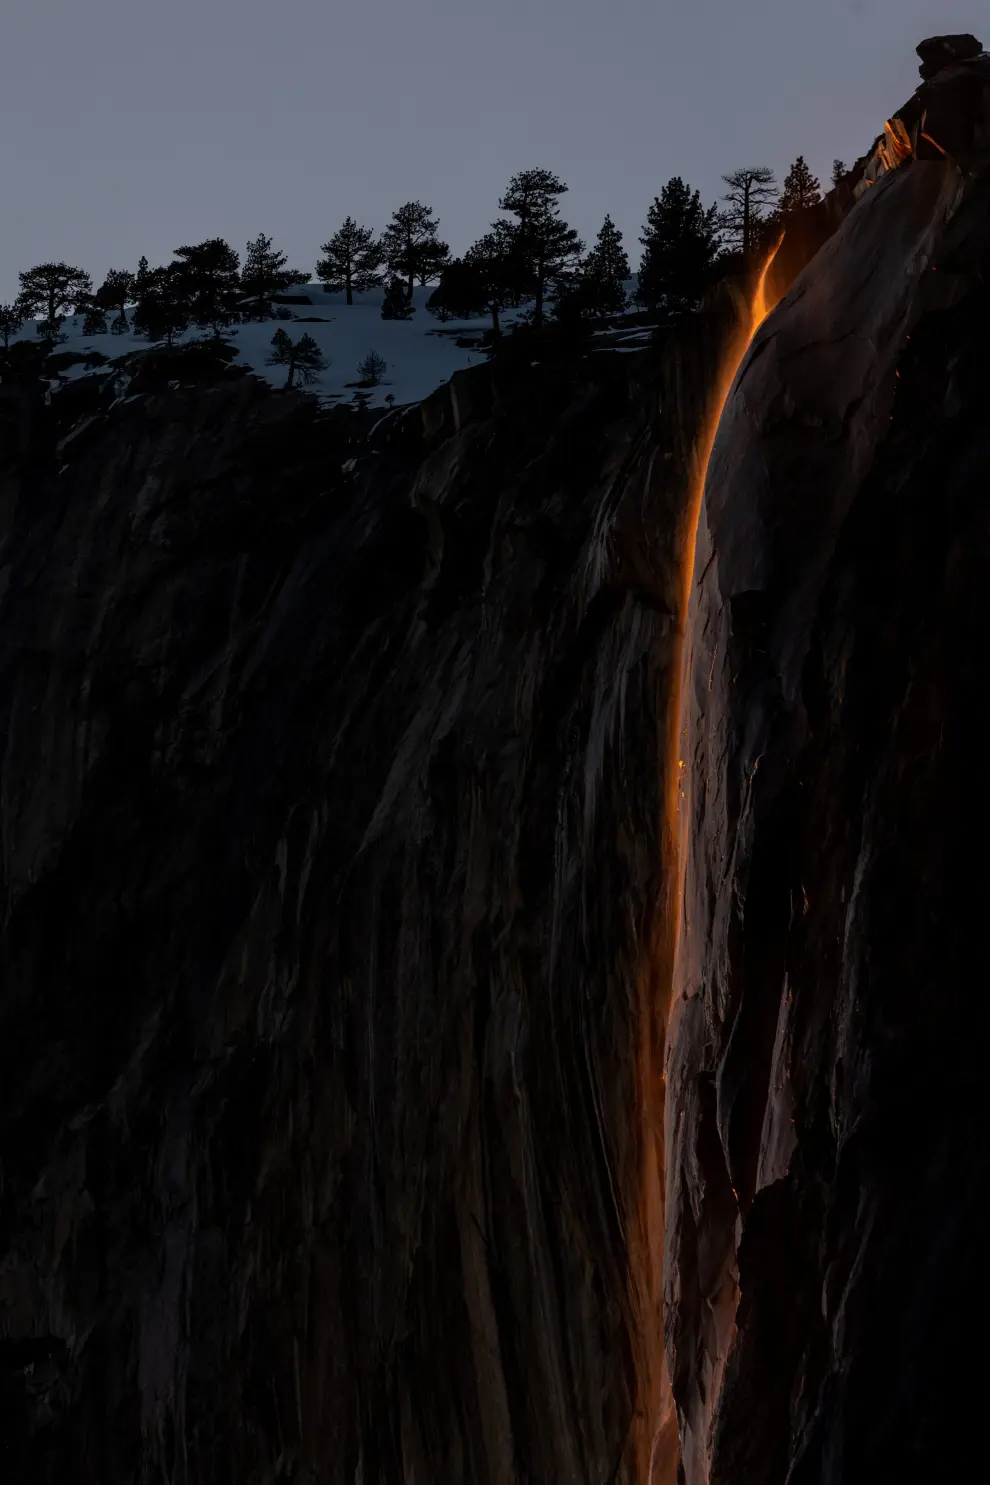 Horsetail Fall at El Capitan is seen during sunset in Yosemite National Park, California, U.S., February 15, 2023. The phenomenon of this vista only occurs for only few days in February each year when several weather and climatic conditions are just right. REUTERS/Carlos Barria USA-YOSEMITE/HORSETAIL-FALL